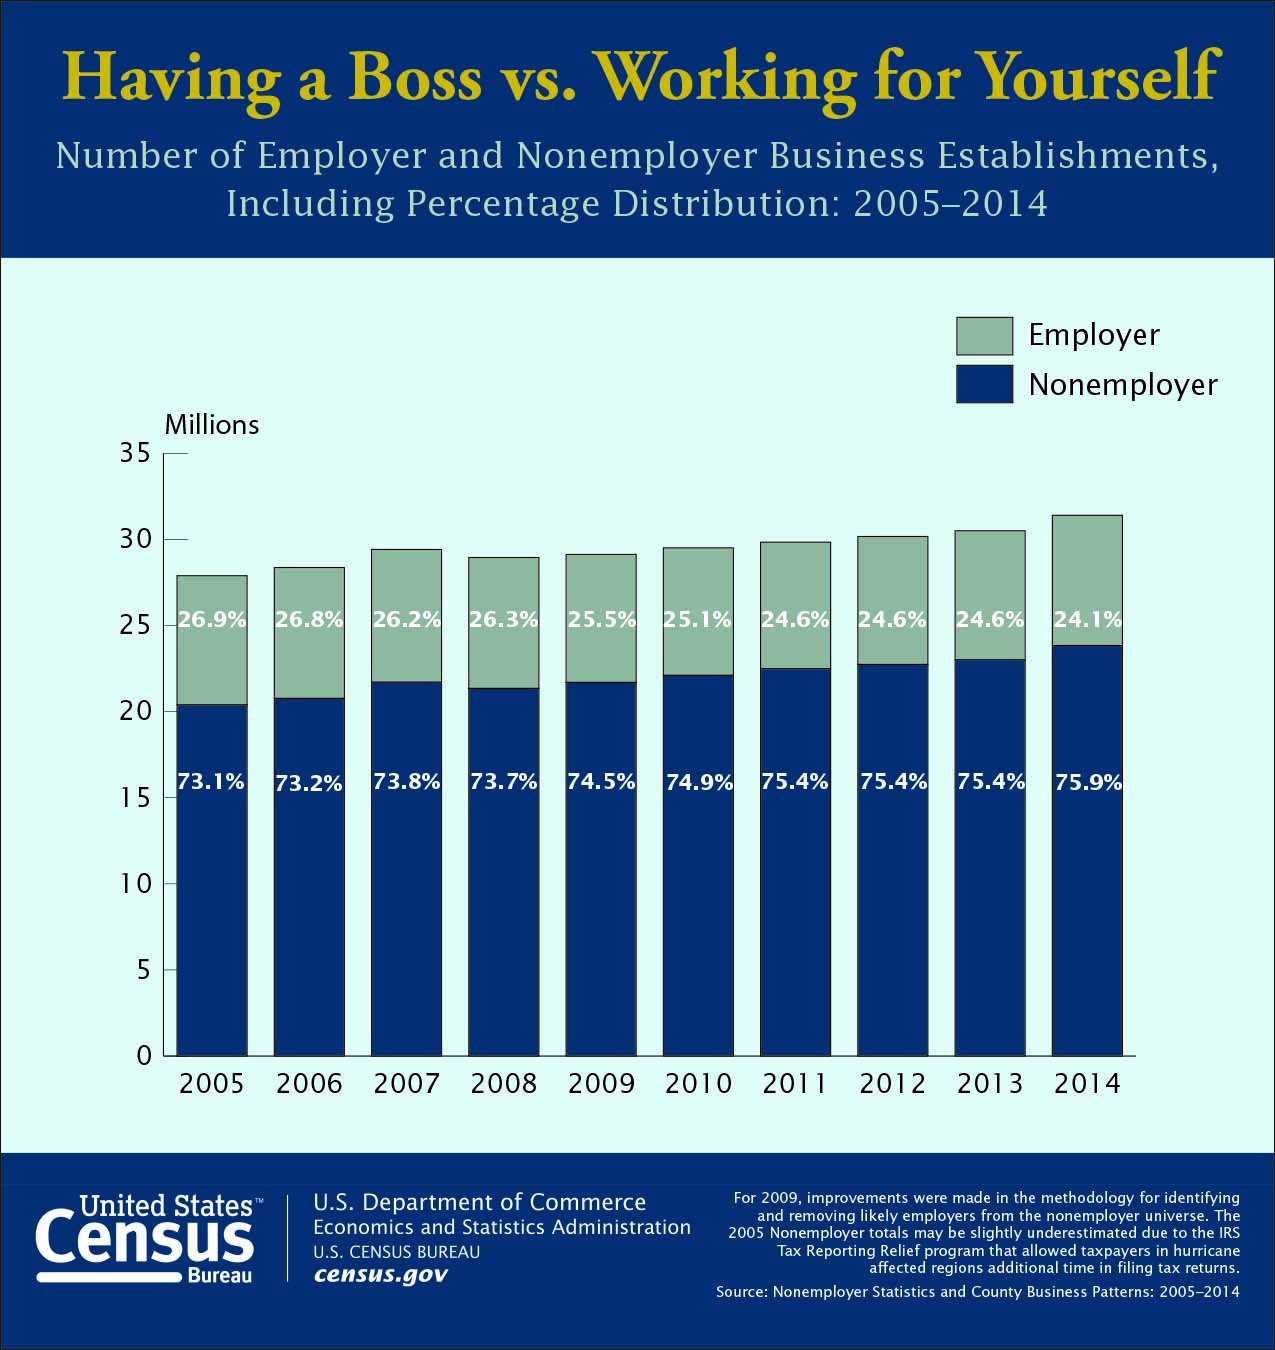 Having a Boss vs. Working for Yourself